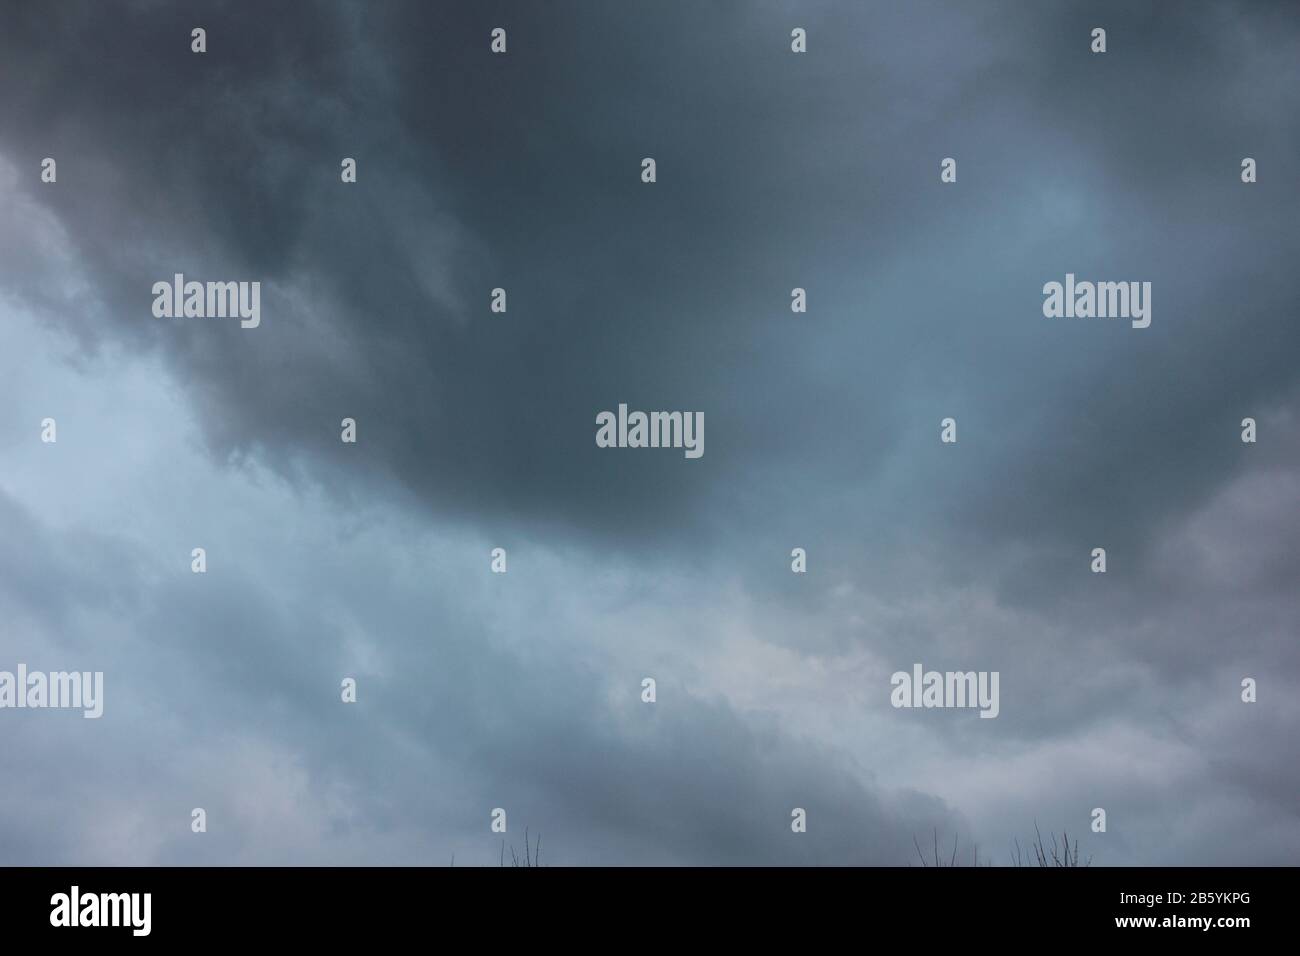 Blurred dramatic sky background. Exciting dark stormy clouds before rain Stock Photo